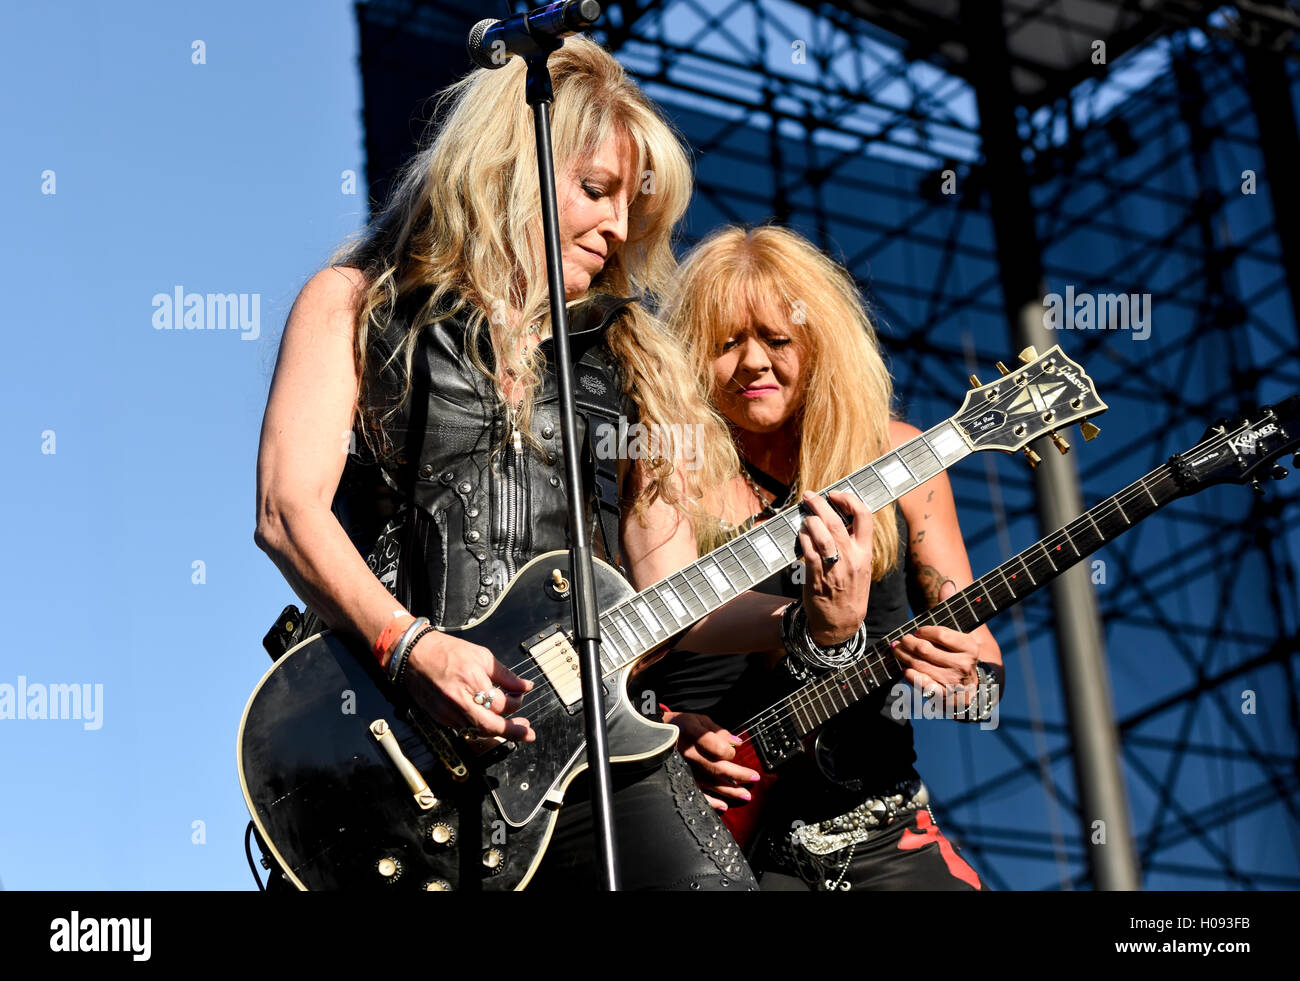 September 17, 2016, Irvine California, Janet Gardner and Gina Stile of the band Vixen on stage at the Sirius XM Hair Nation Fest Stock Photo